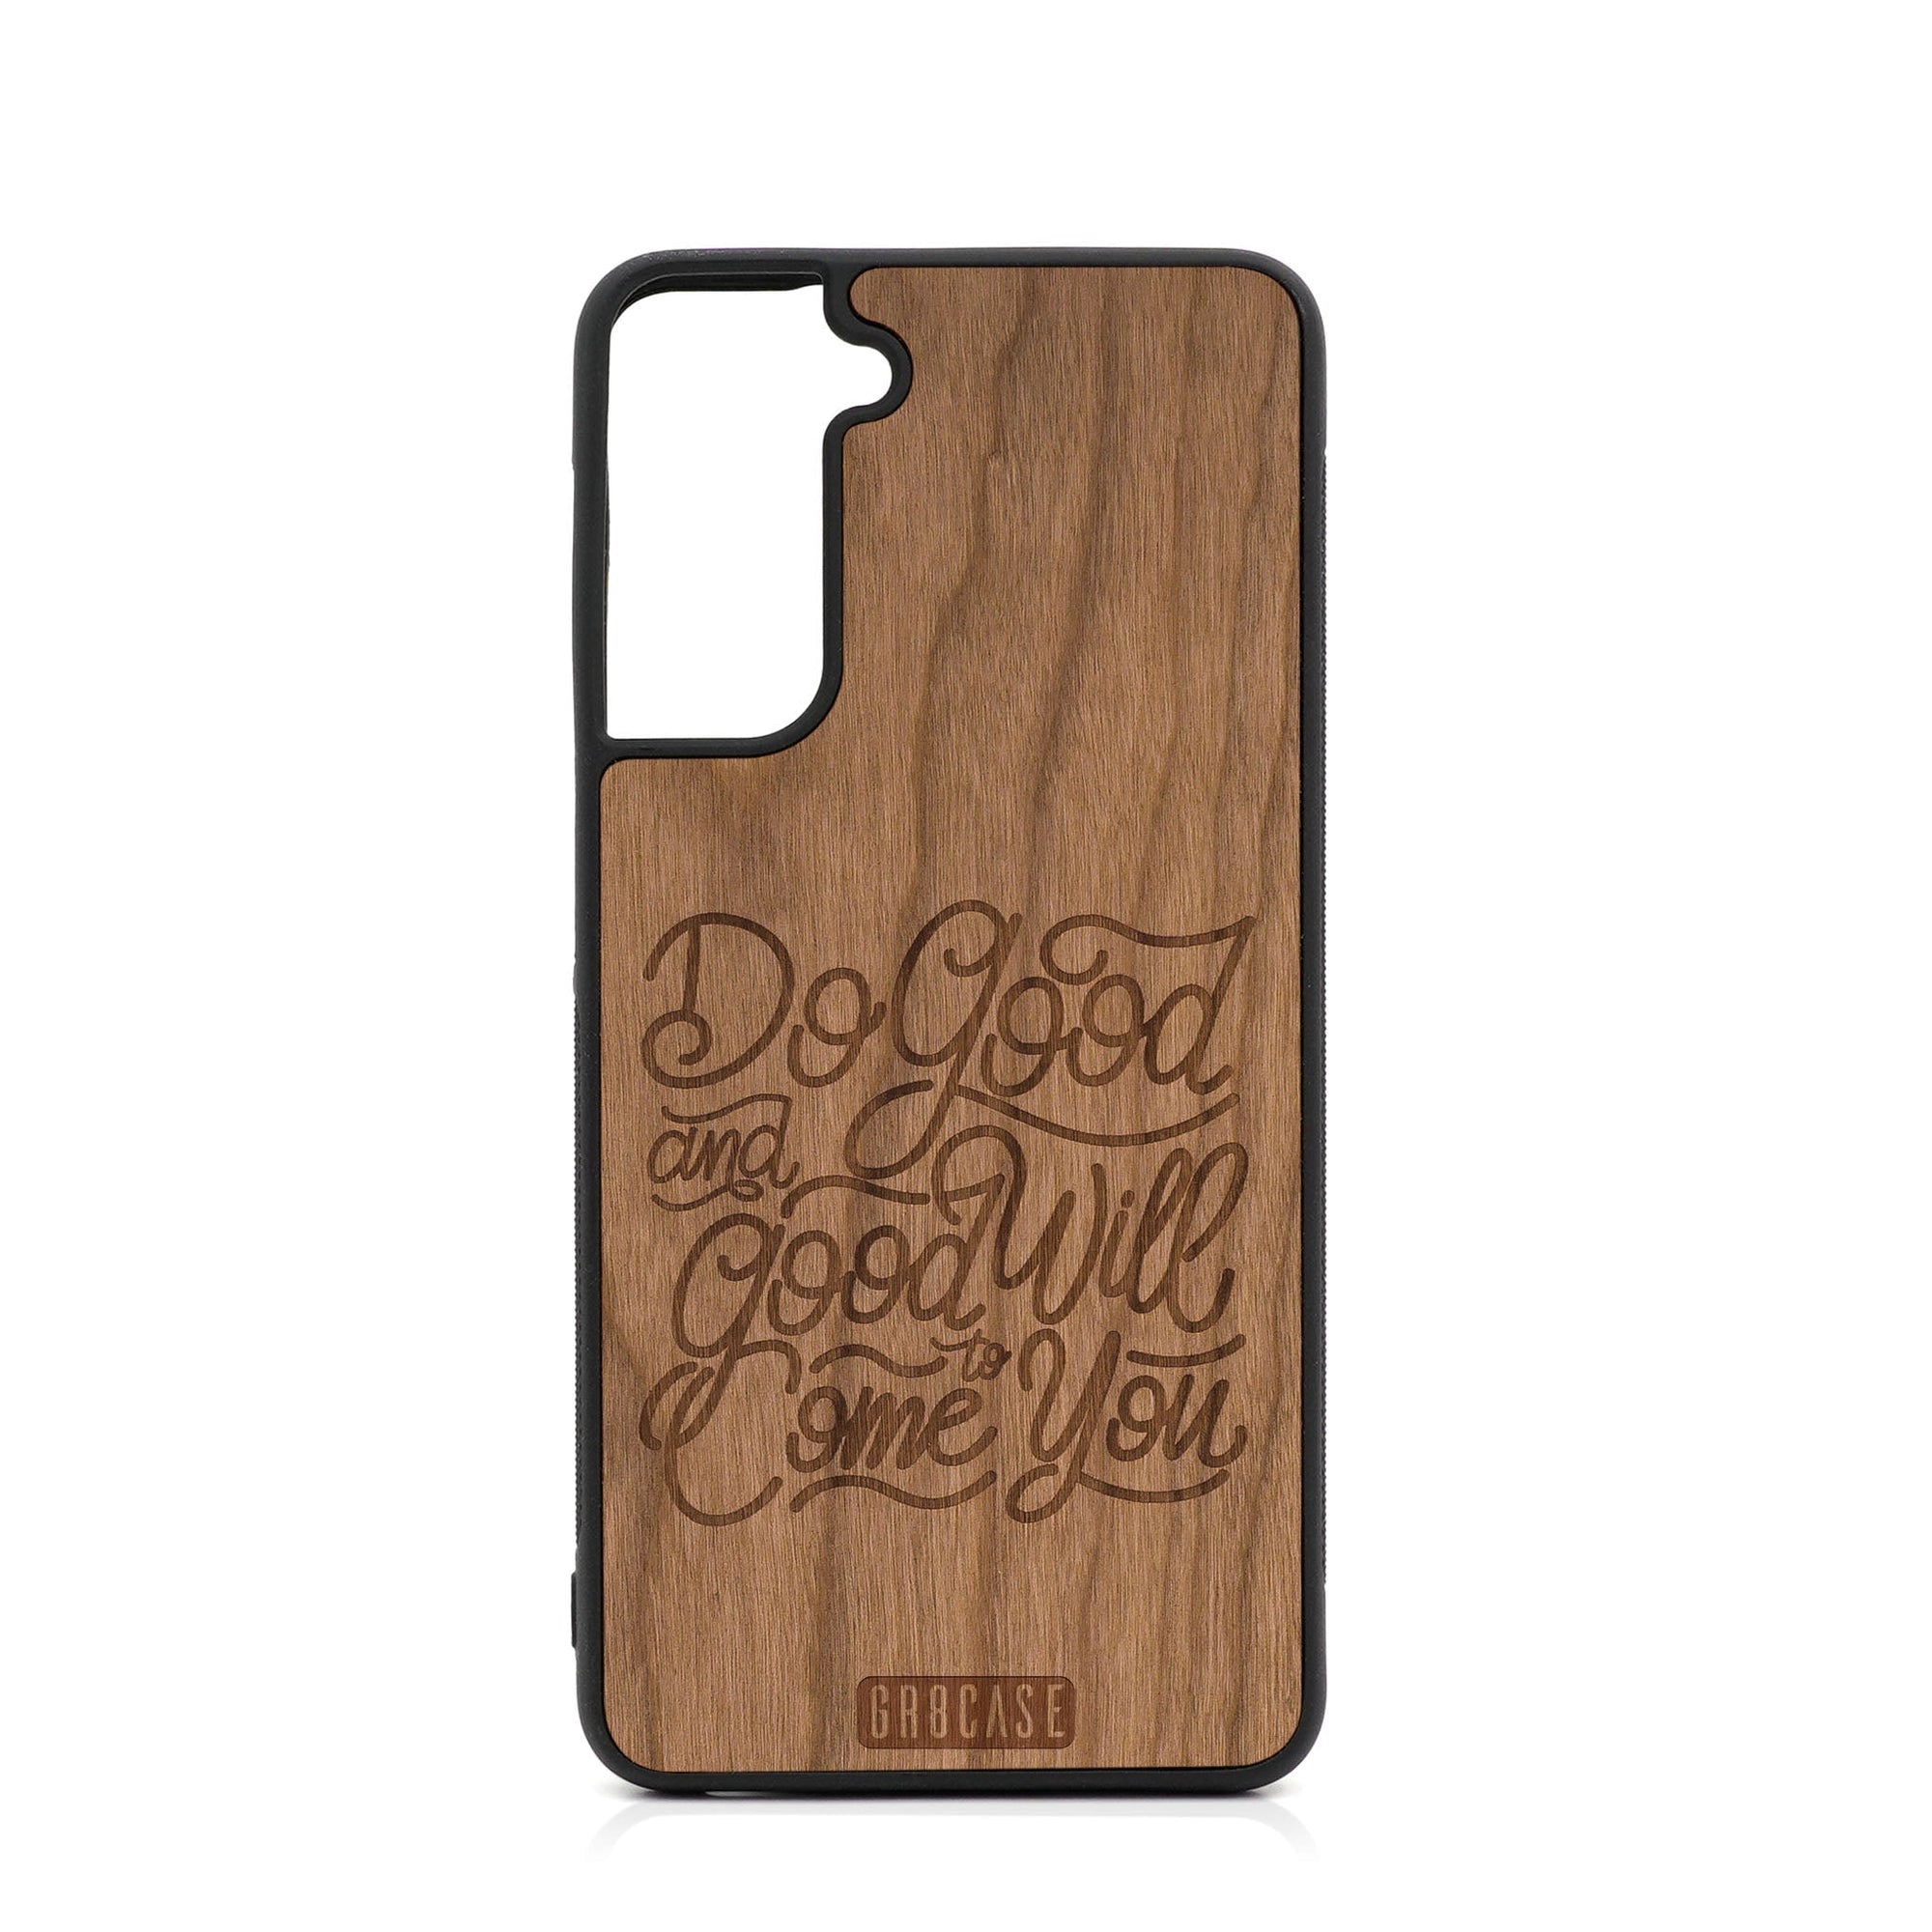 Do Good And Good Will Come To You Design Wood Case For Samsung Galaxy S21 FE 5G